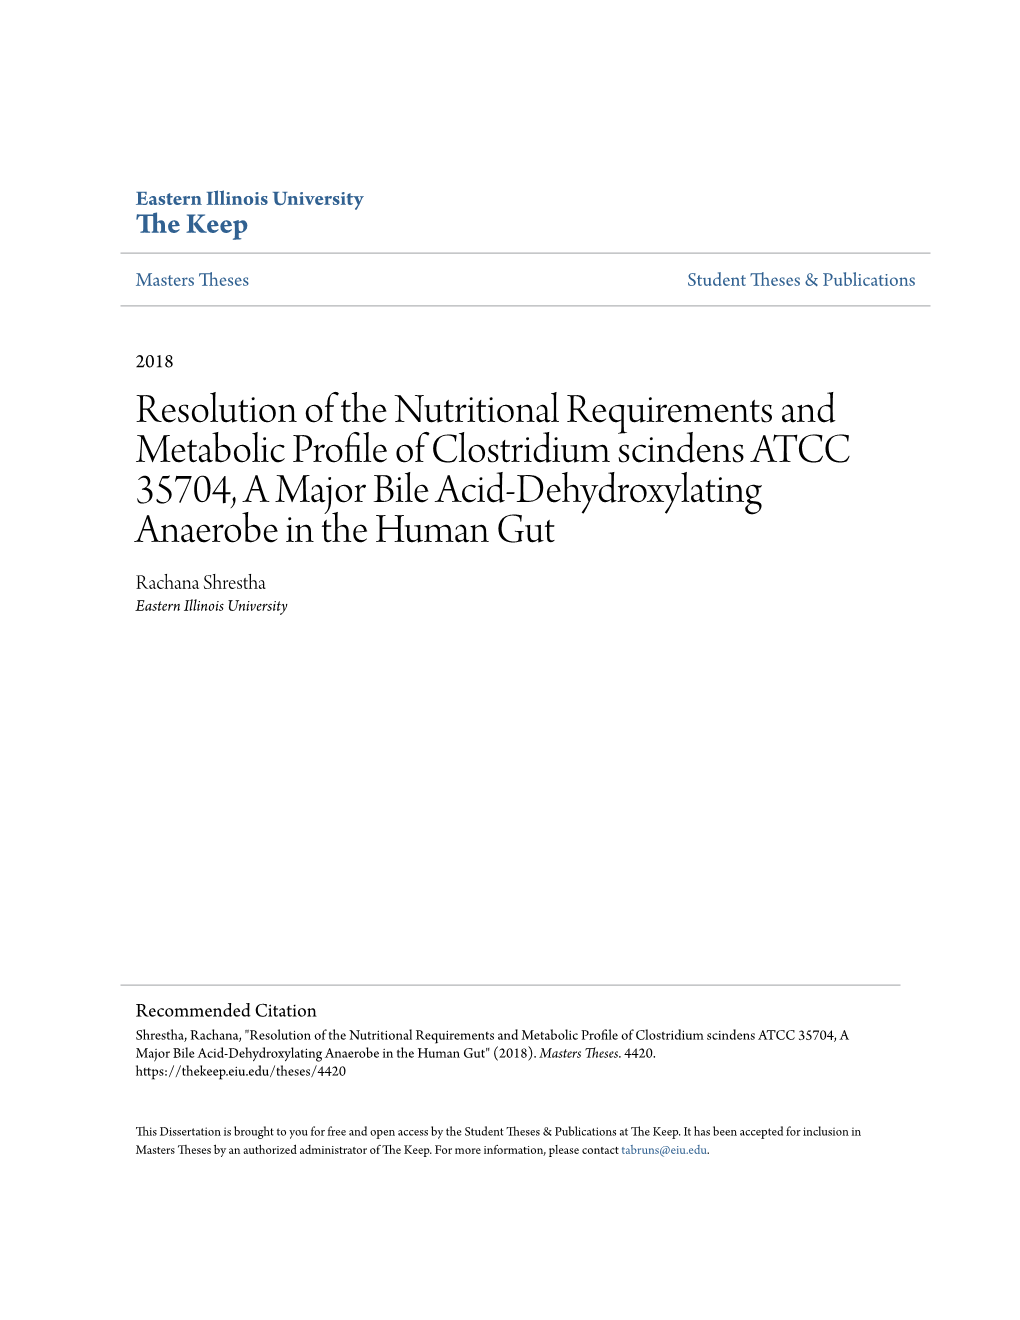 Resolution of the Nutritional Requirements and Metabolic Profile of Clostridium Scindens ATCC 35704, a Major Bile Acid-Dehydroxy